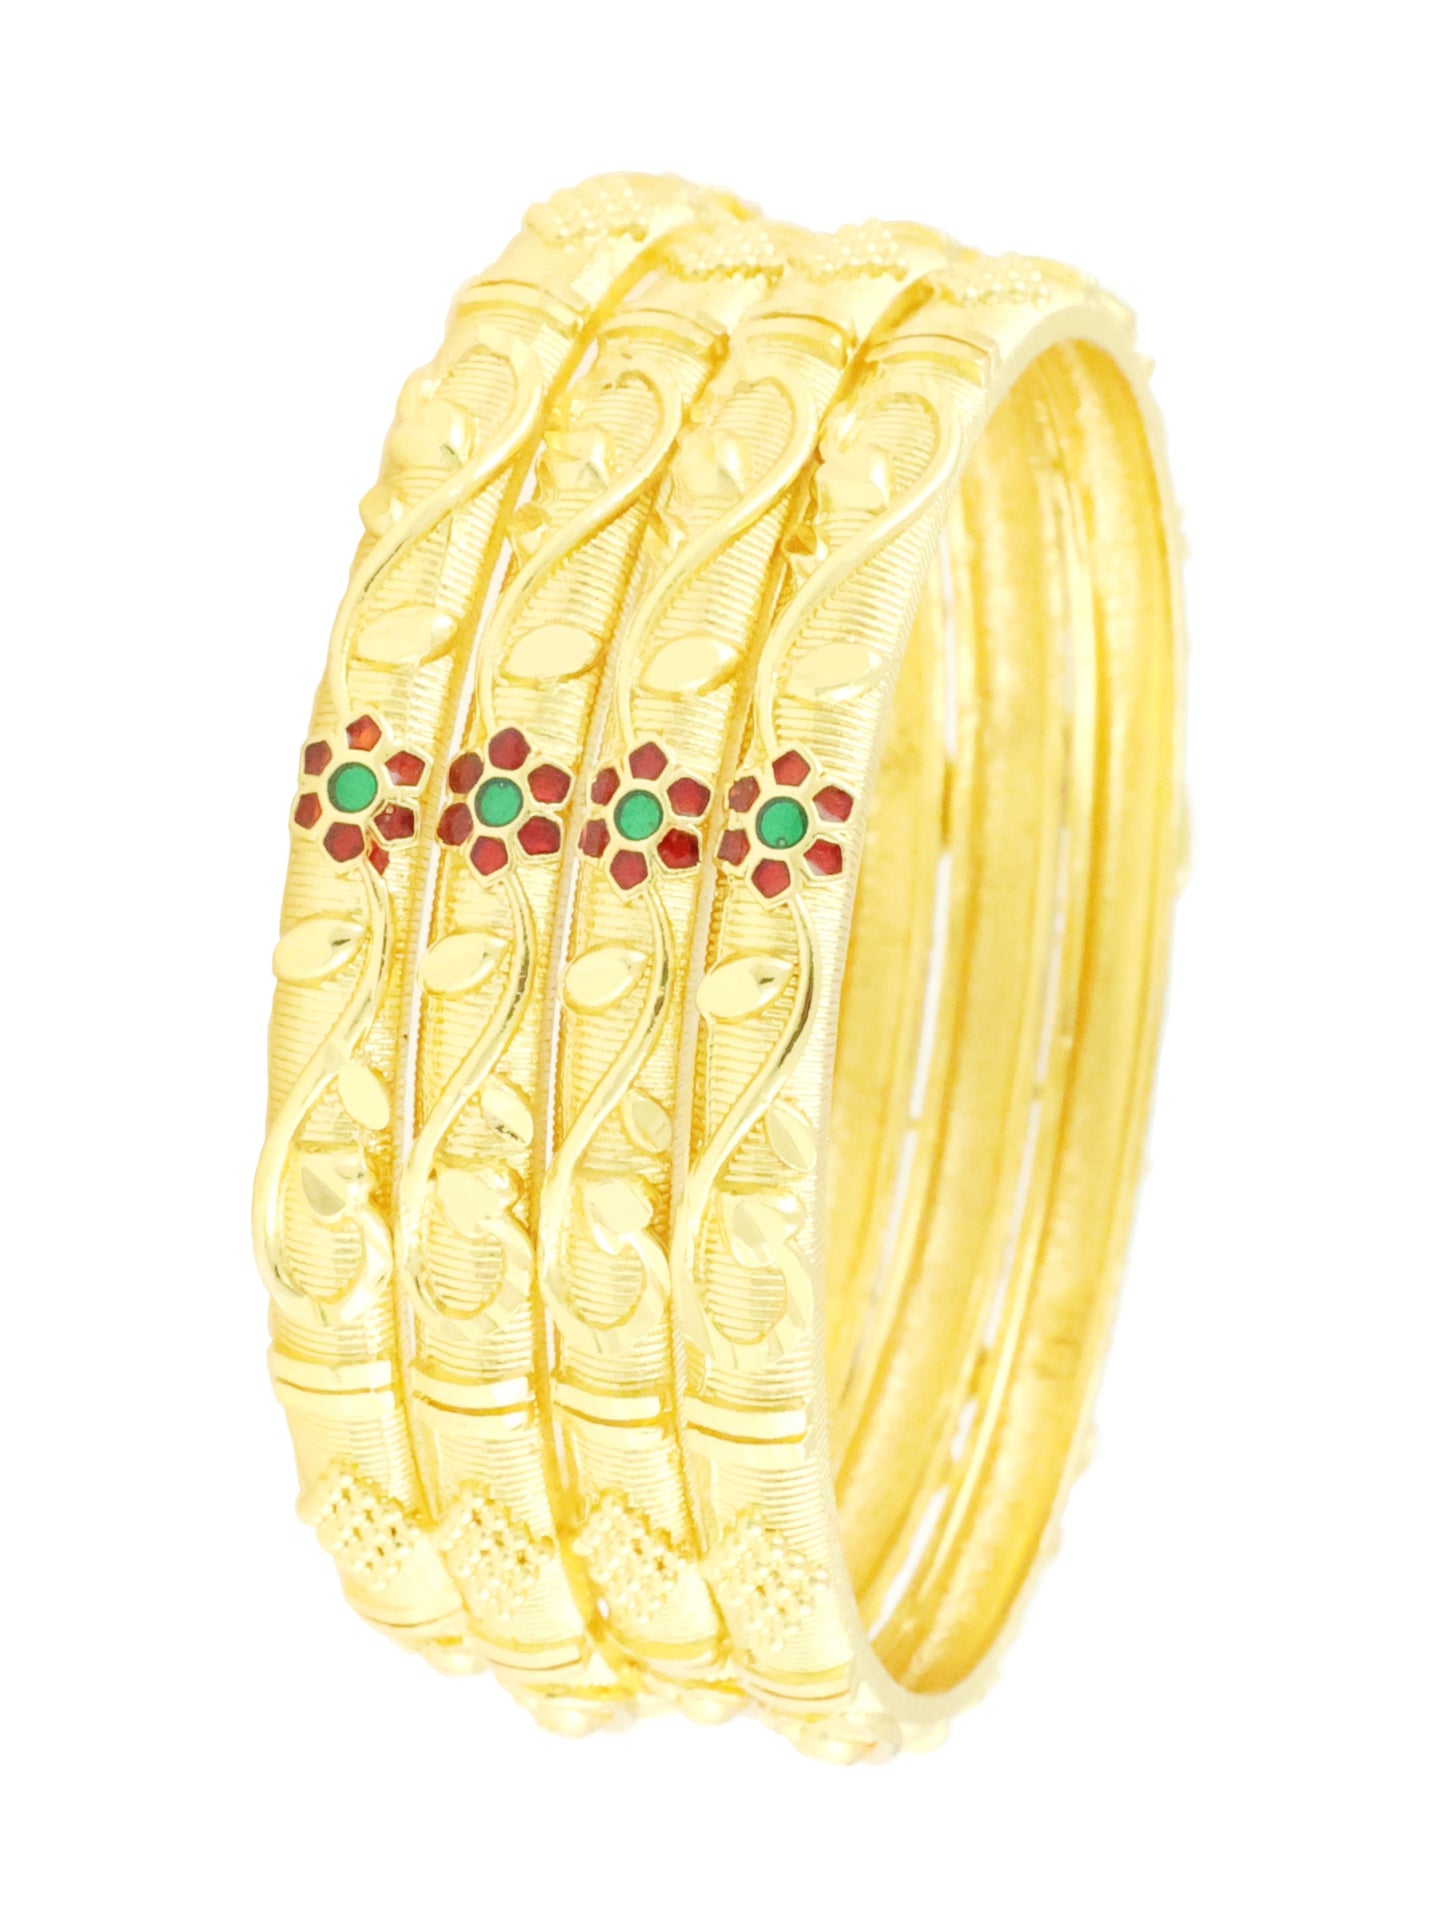 Enhance your style with the Mekkna Gold Plated Bangles set